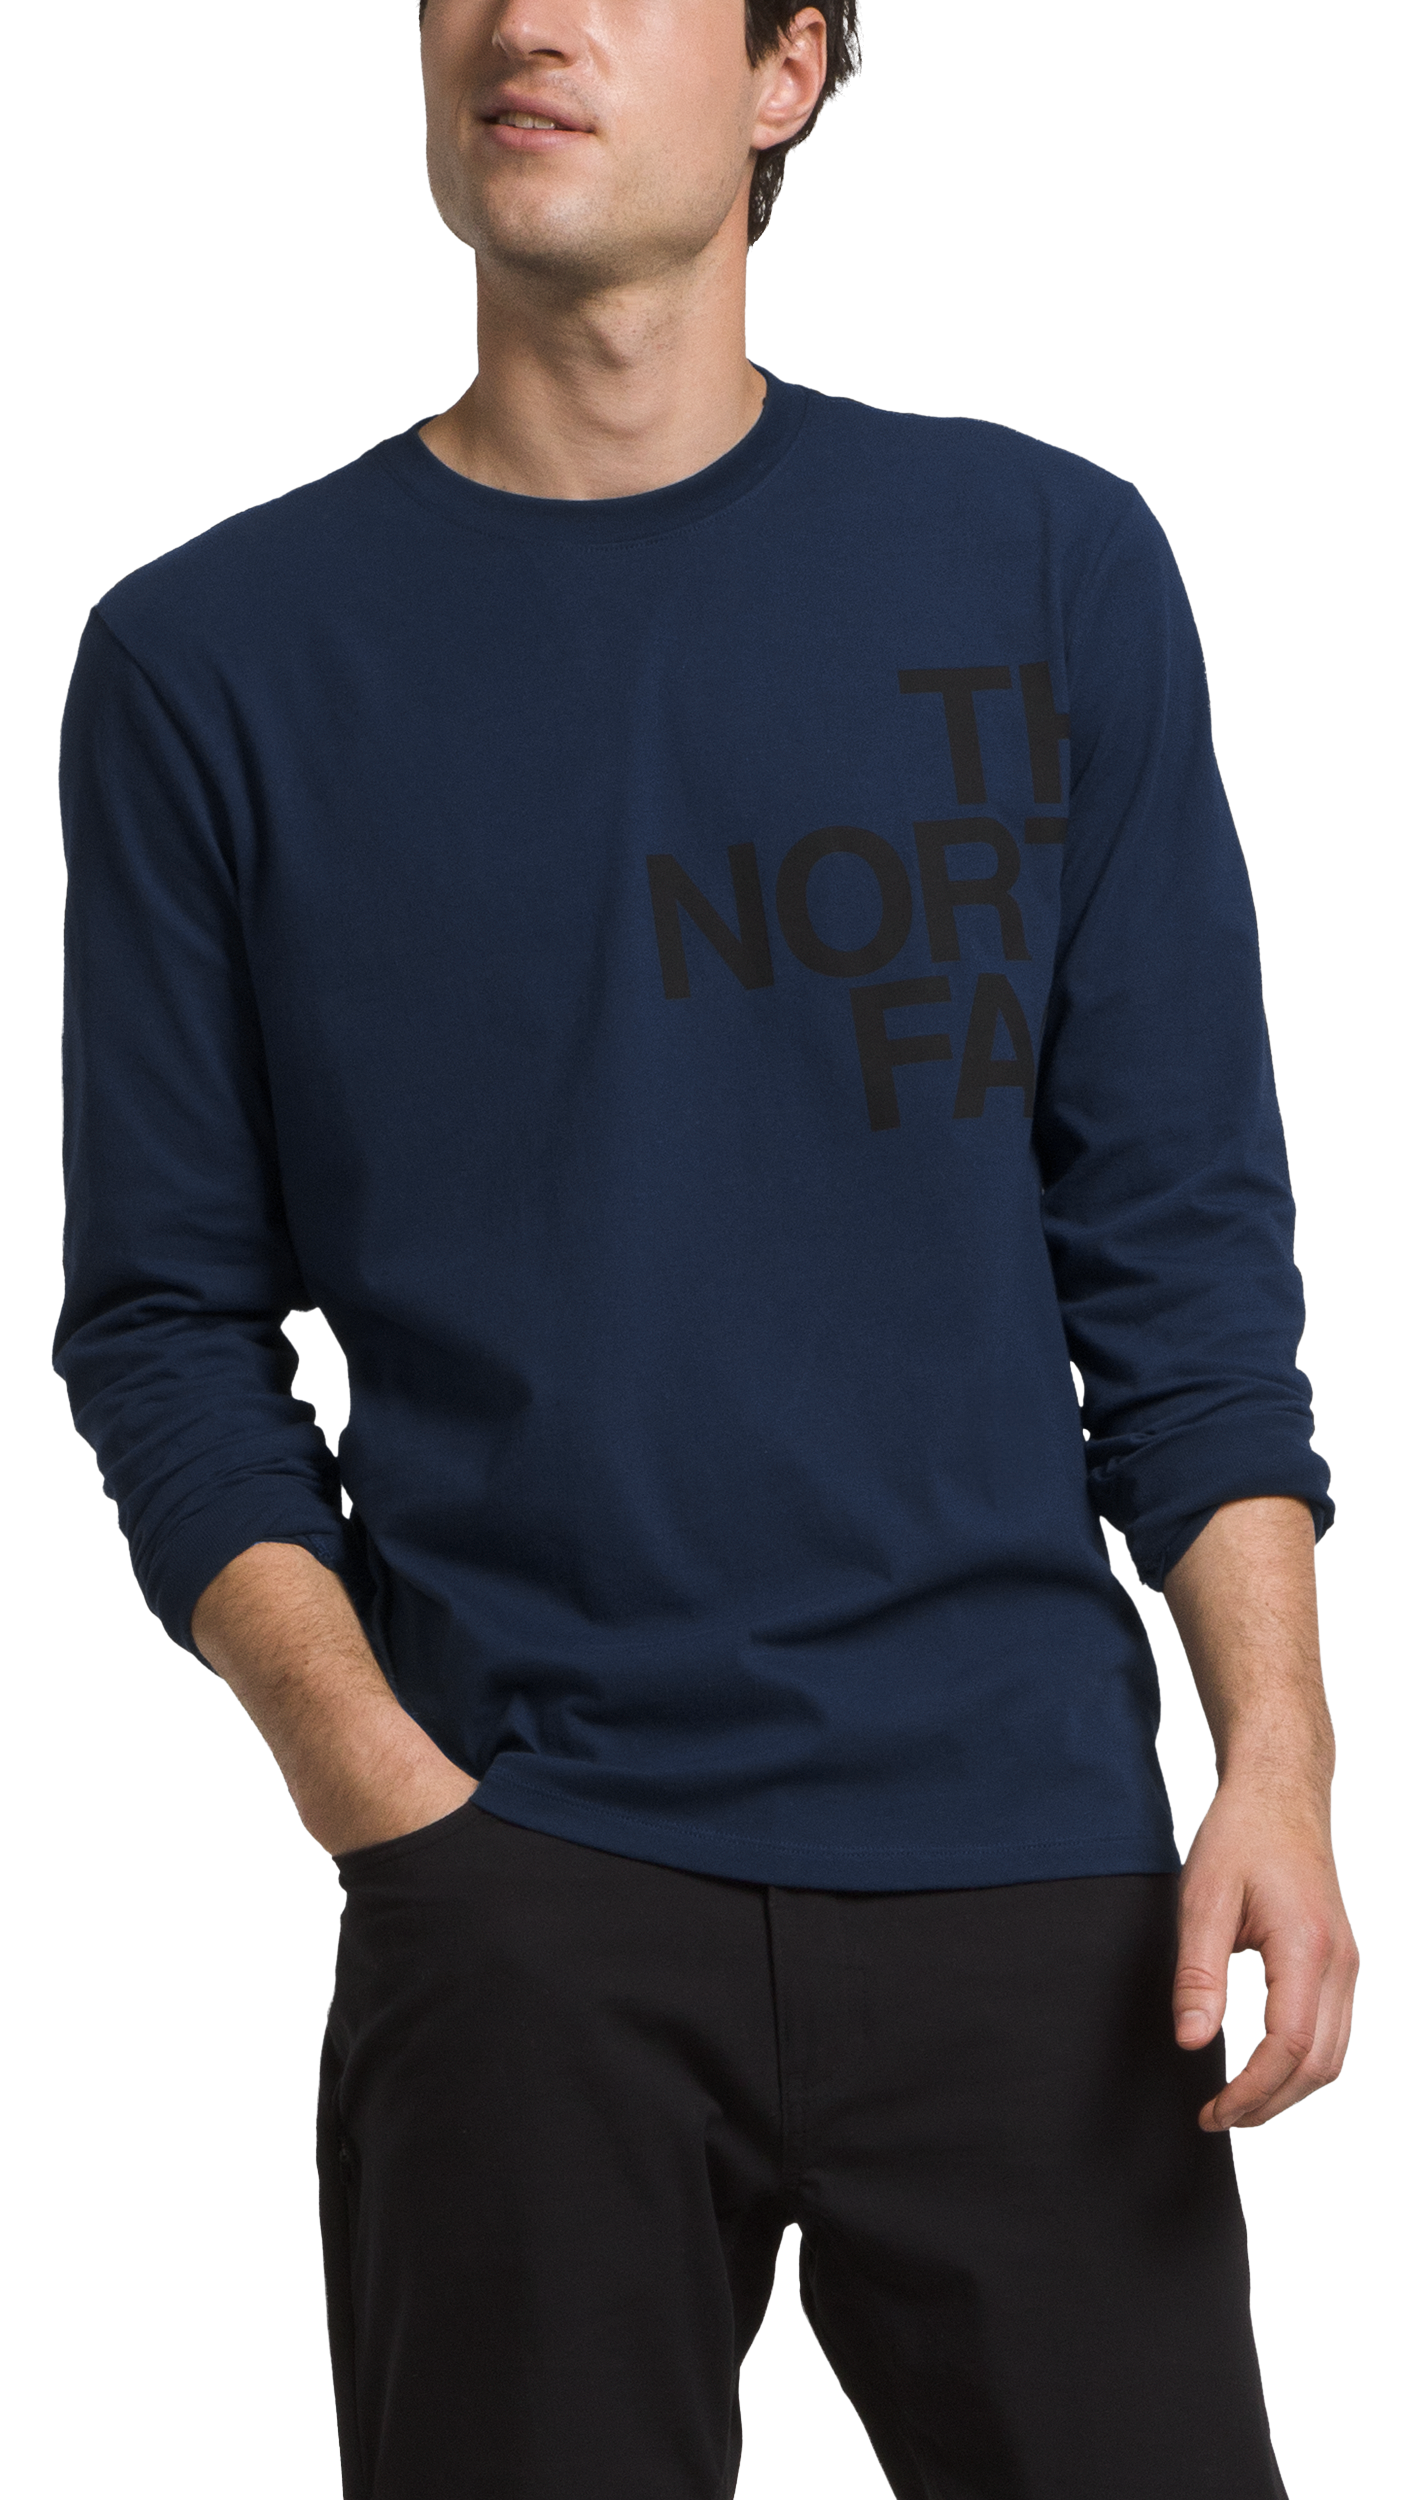 The North Face Brand Proud Long-Sleeve T-Shirt for Men - Summit Navy/TNF Black - 2XL